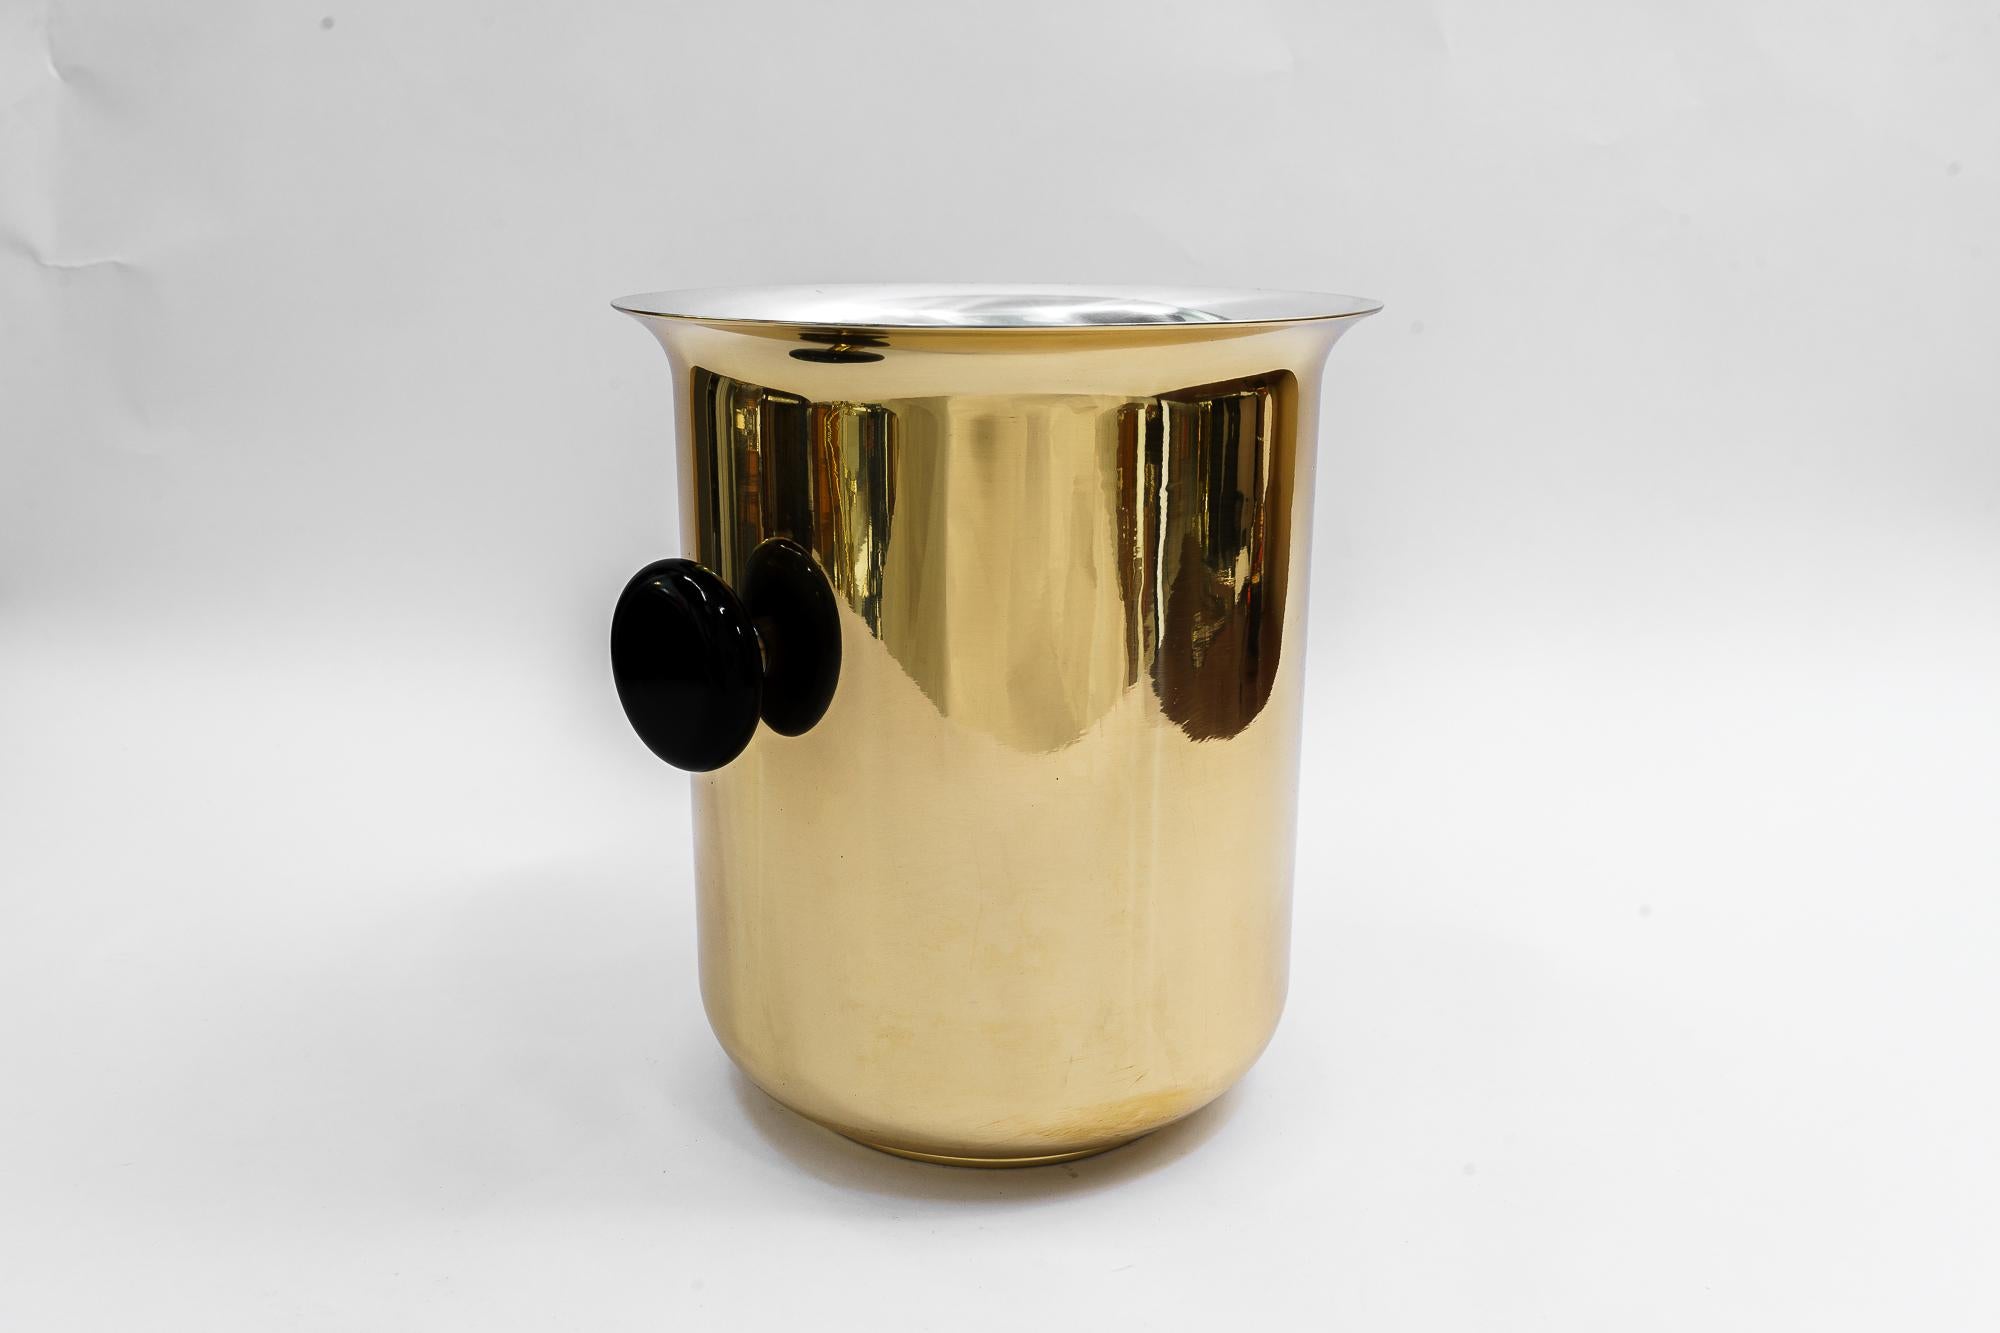 Champagne Bucket germany around 1950s
Polished and stove enameled
